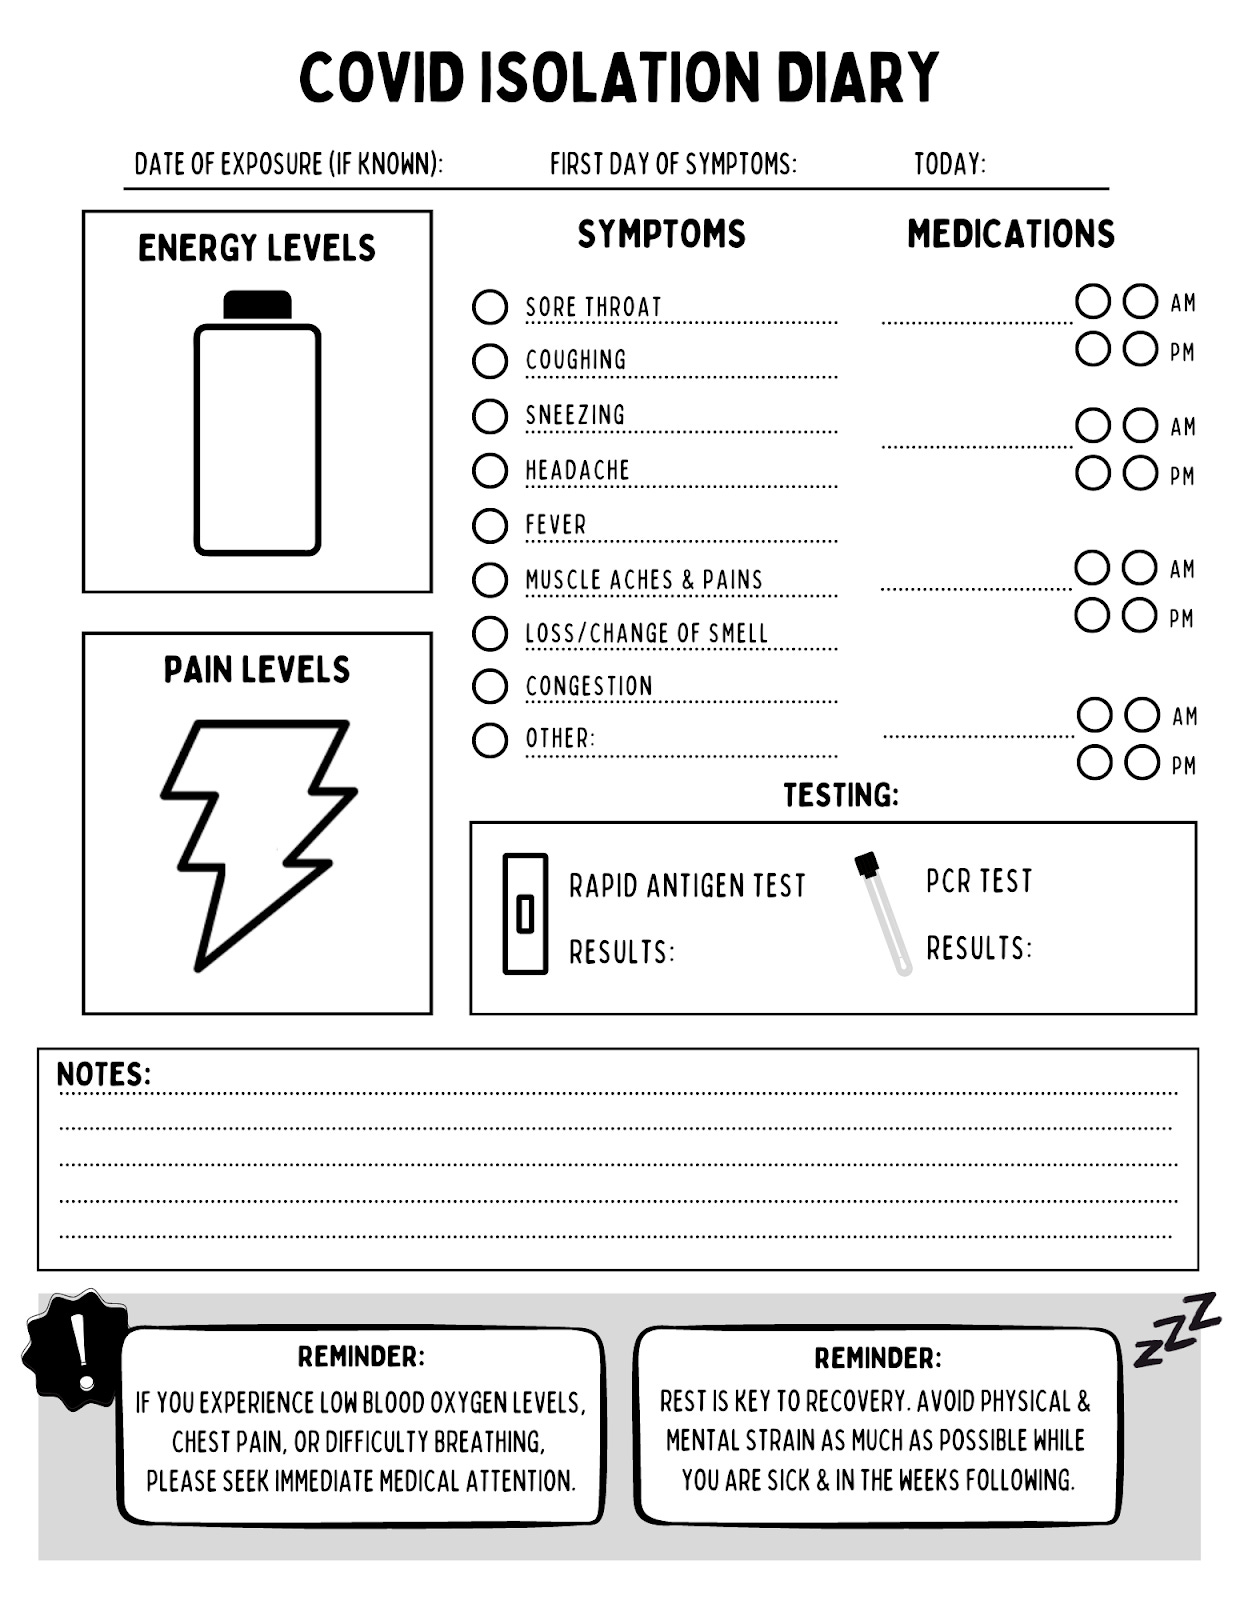 This is a template of a diary for tracking COVID symptoms. The page header has room for you to fill in dates: "Date of Exposure (if known)," "First Day of Symptoms," and "Today." The top two-thirds of the page has a few subsections. On the left, there is a box labeled Energy Levels with an image of a battery for you to color in your energy level and a box below it labeled Pain Level with an image of a lightning bolt for you to color in your pain level. On the right, it has a checklist of symptoms including sore throat, coughing, sneezing, headache, fever, muscle aches & pains, loss/change of smell, congestion, and other that has a blank. It also has a fillable area for medications taken in the morning or afternoon. Finally, there is a testing section where you can circle which test you took--rapid or PCR and your test results.  In the bottom one-third of the page, there is a section for any notes you want to take, followed by two reminders: "If you experience low blood oxygen levels, chest pain, or difficulty breathing, please seek immediate medical attention." and "Rest is key to recovery. Avoid physical and mental strain as much as possible while you are sick and in the weeks following."